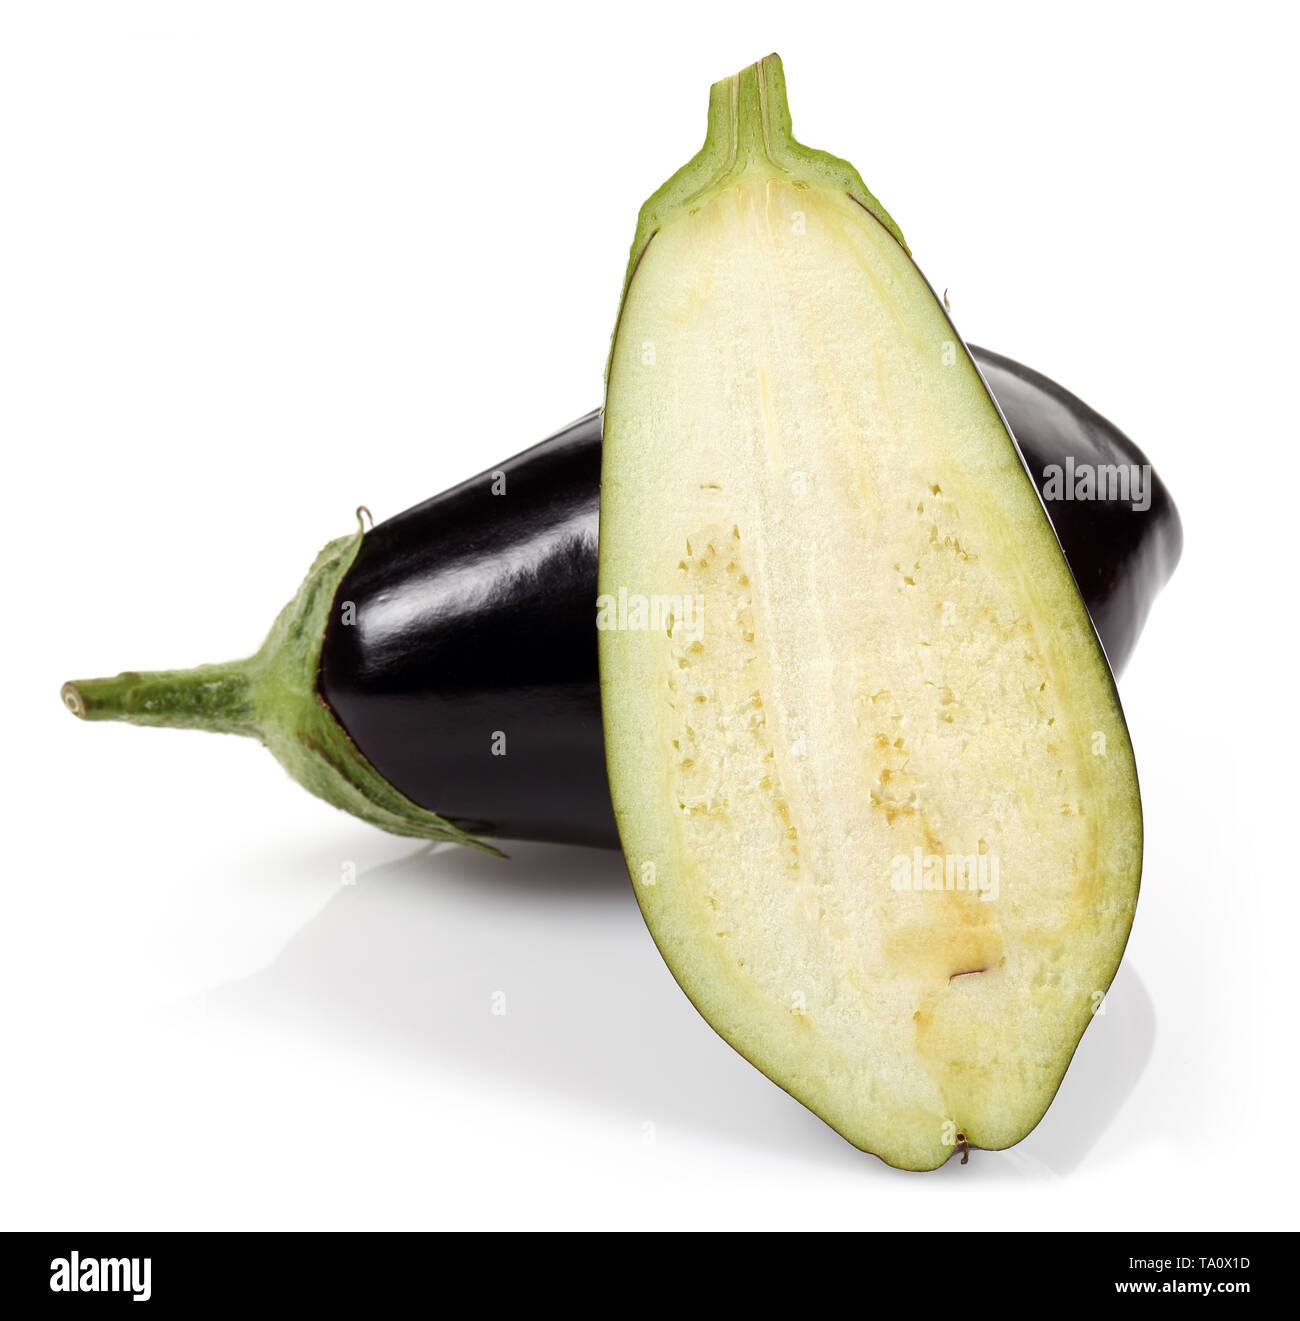 Eggplant or Aubergine vegetable and slices isolated on white background Stock Photo